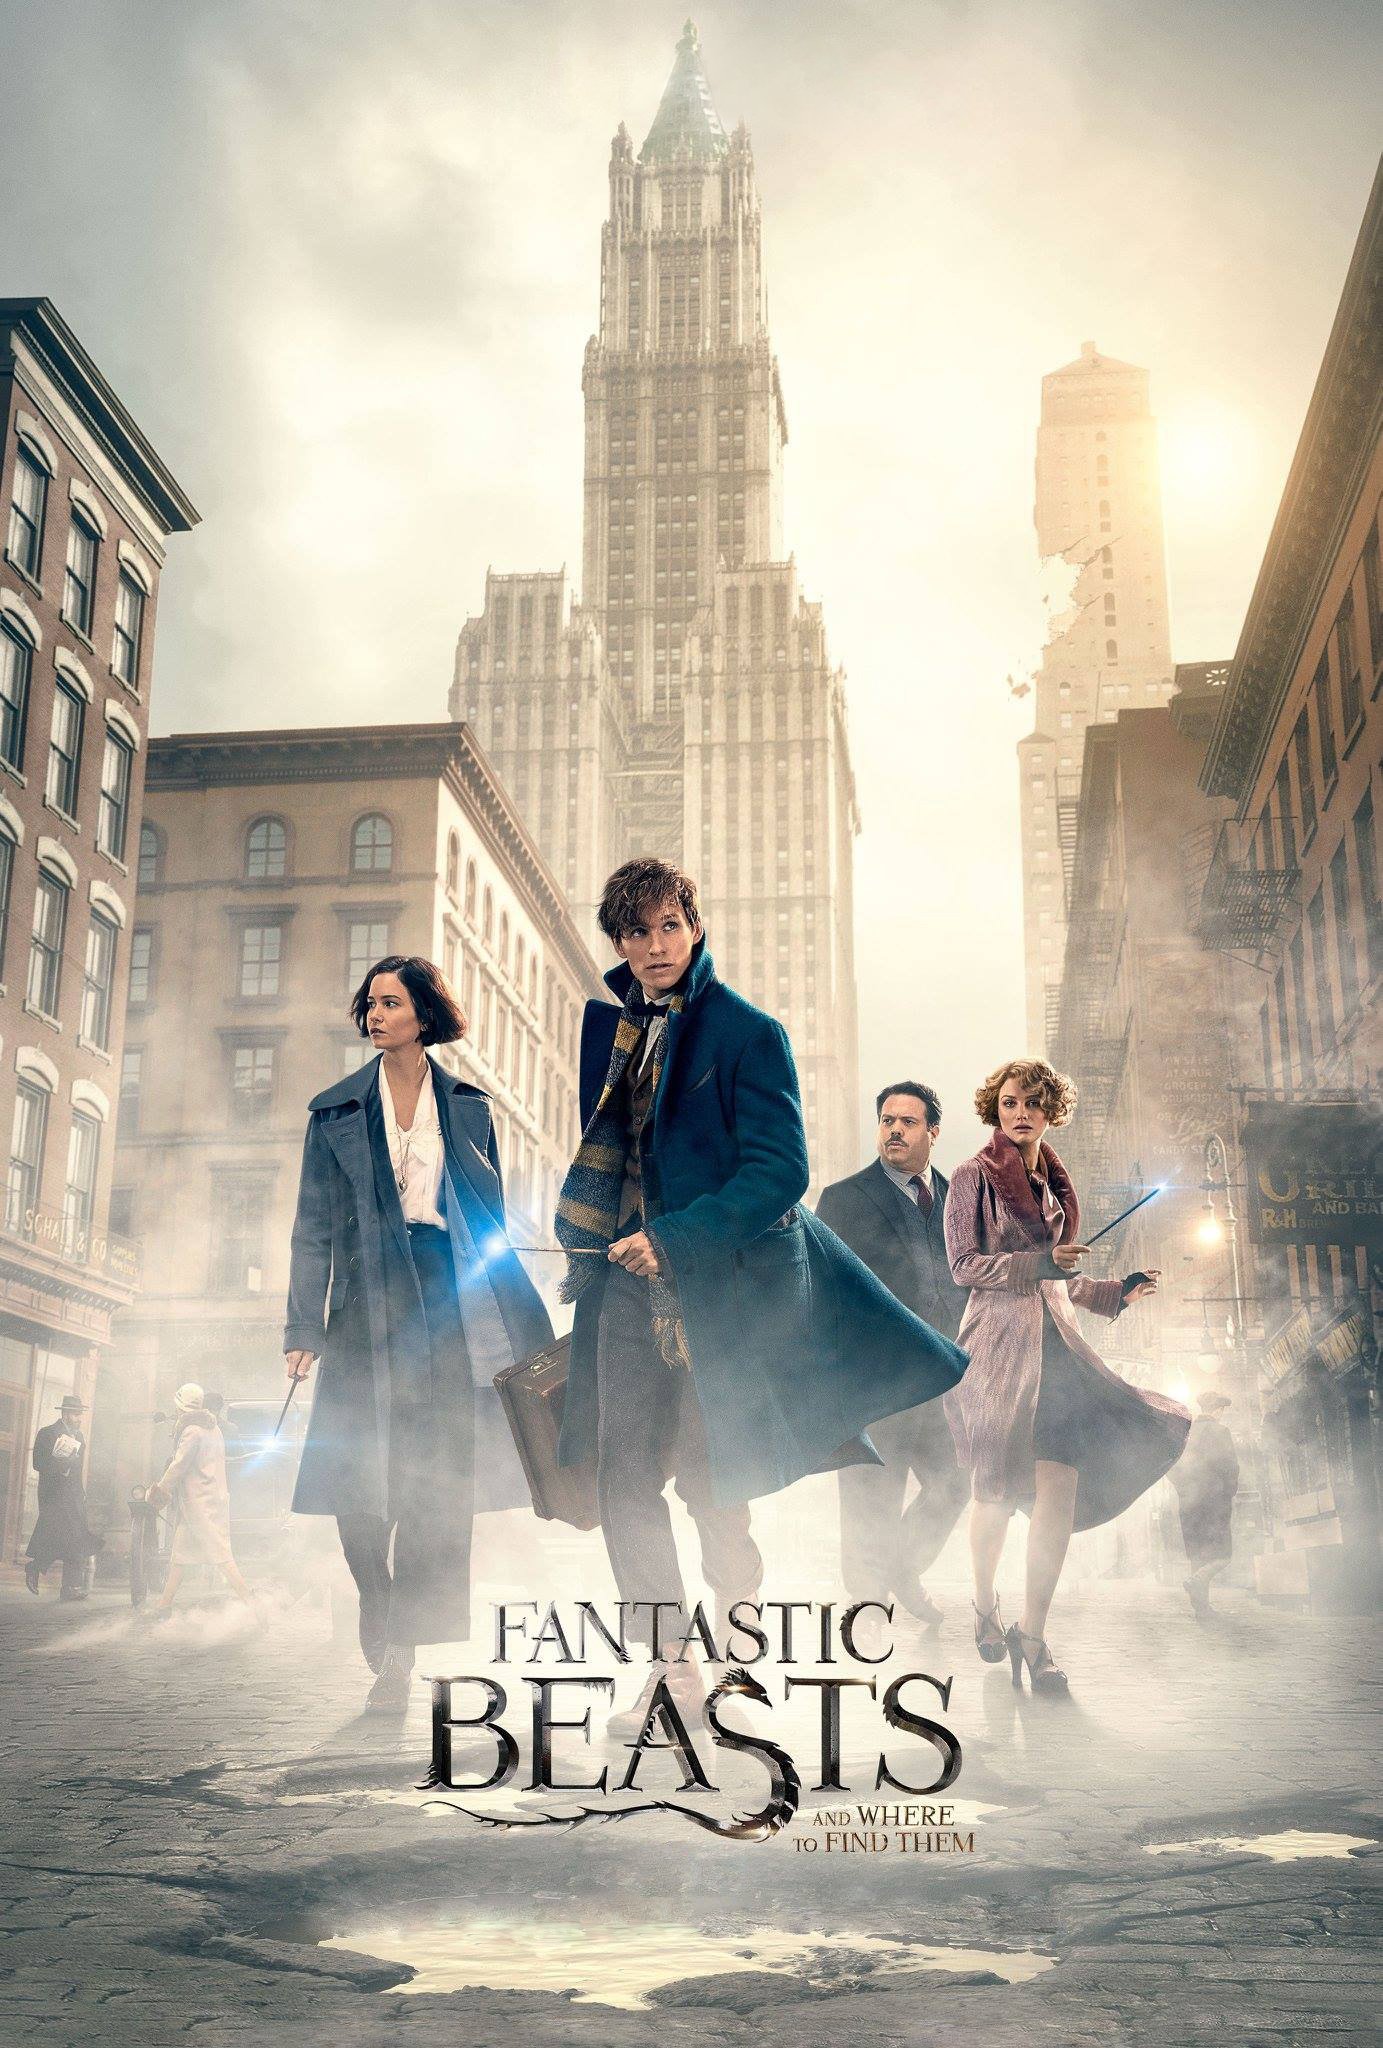 Poster de la película "Fantastic Beasts and Where to Find Them"